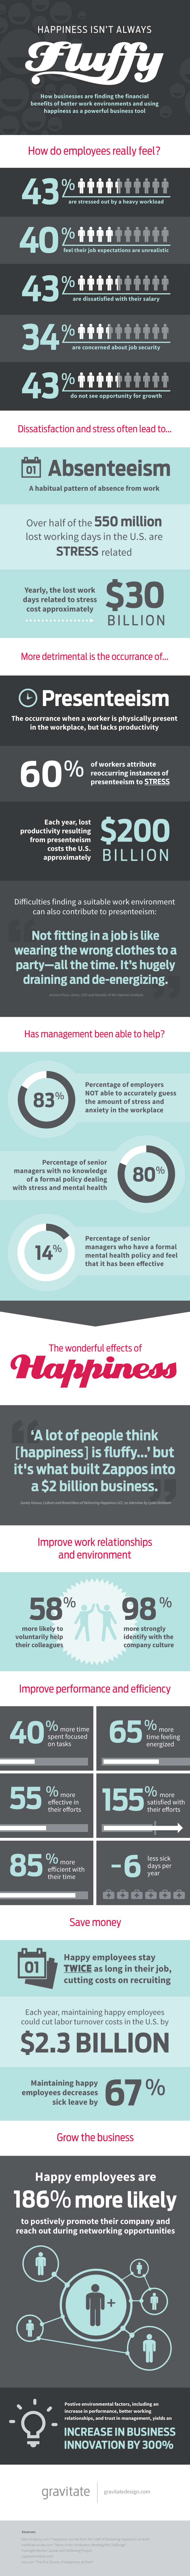 employee happiness as a business tool1 - How Does Employee Happiness Affect Your Dental Practice?